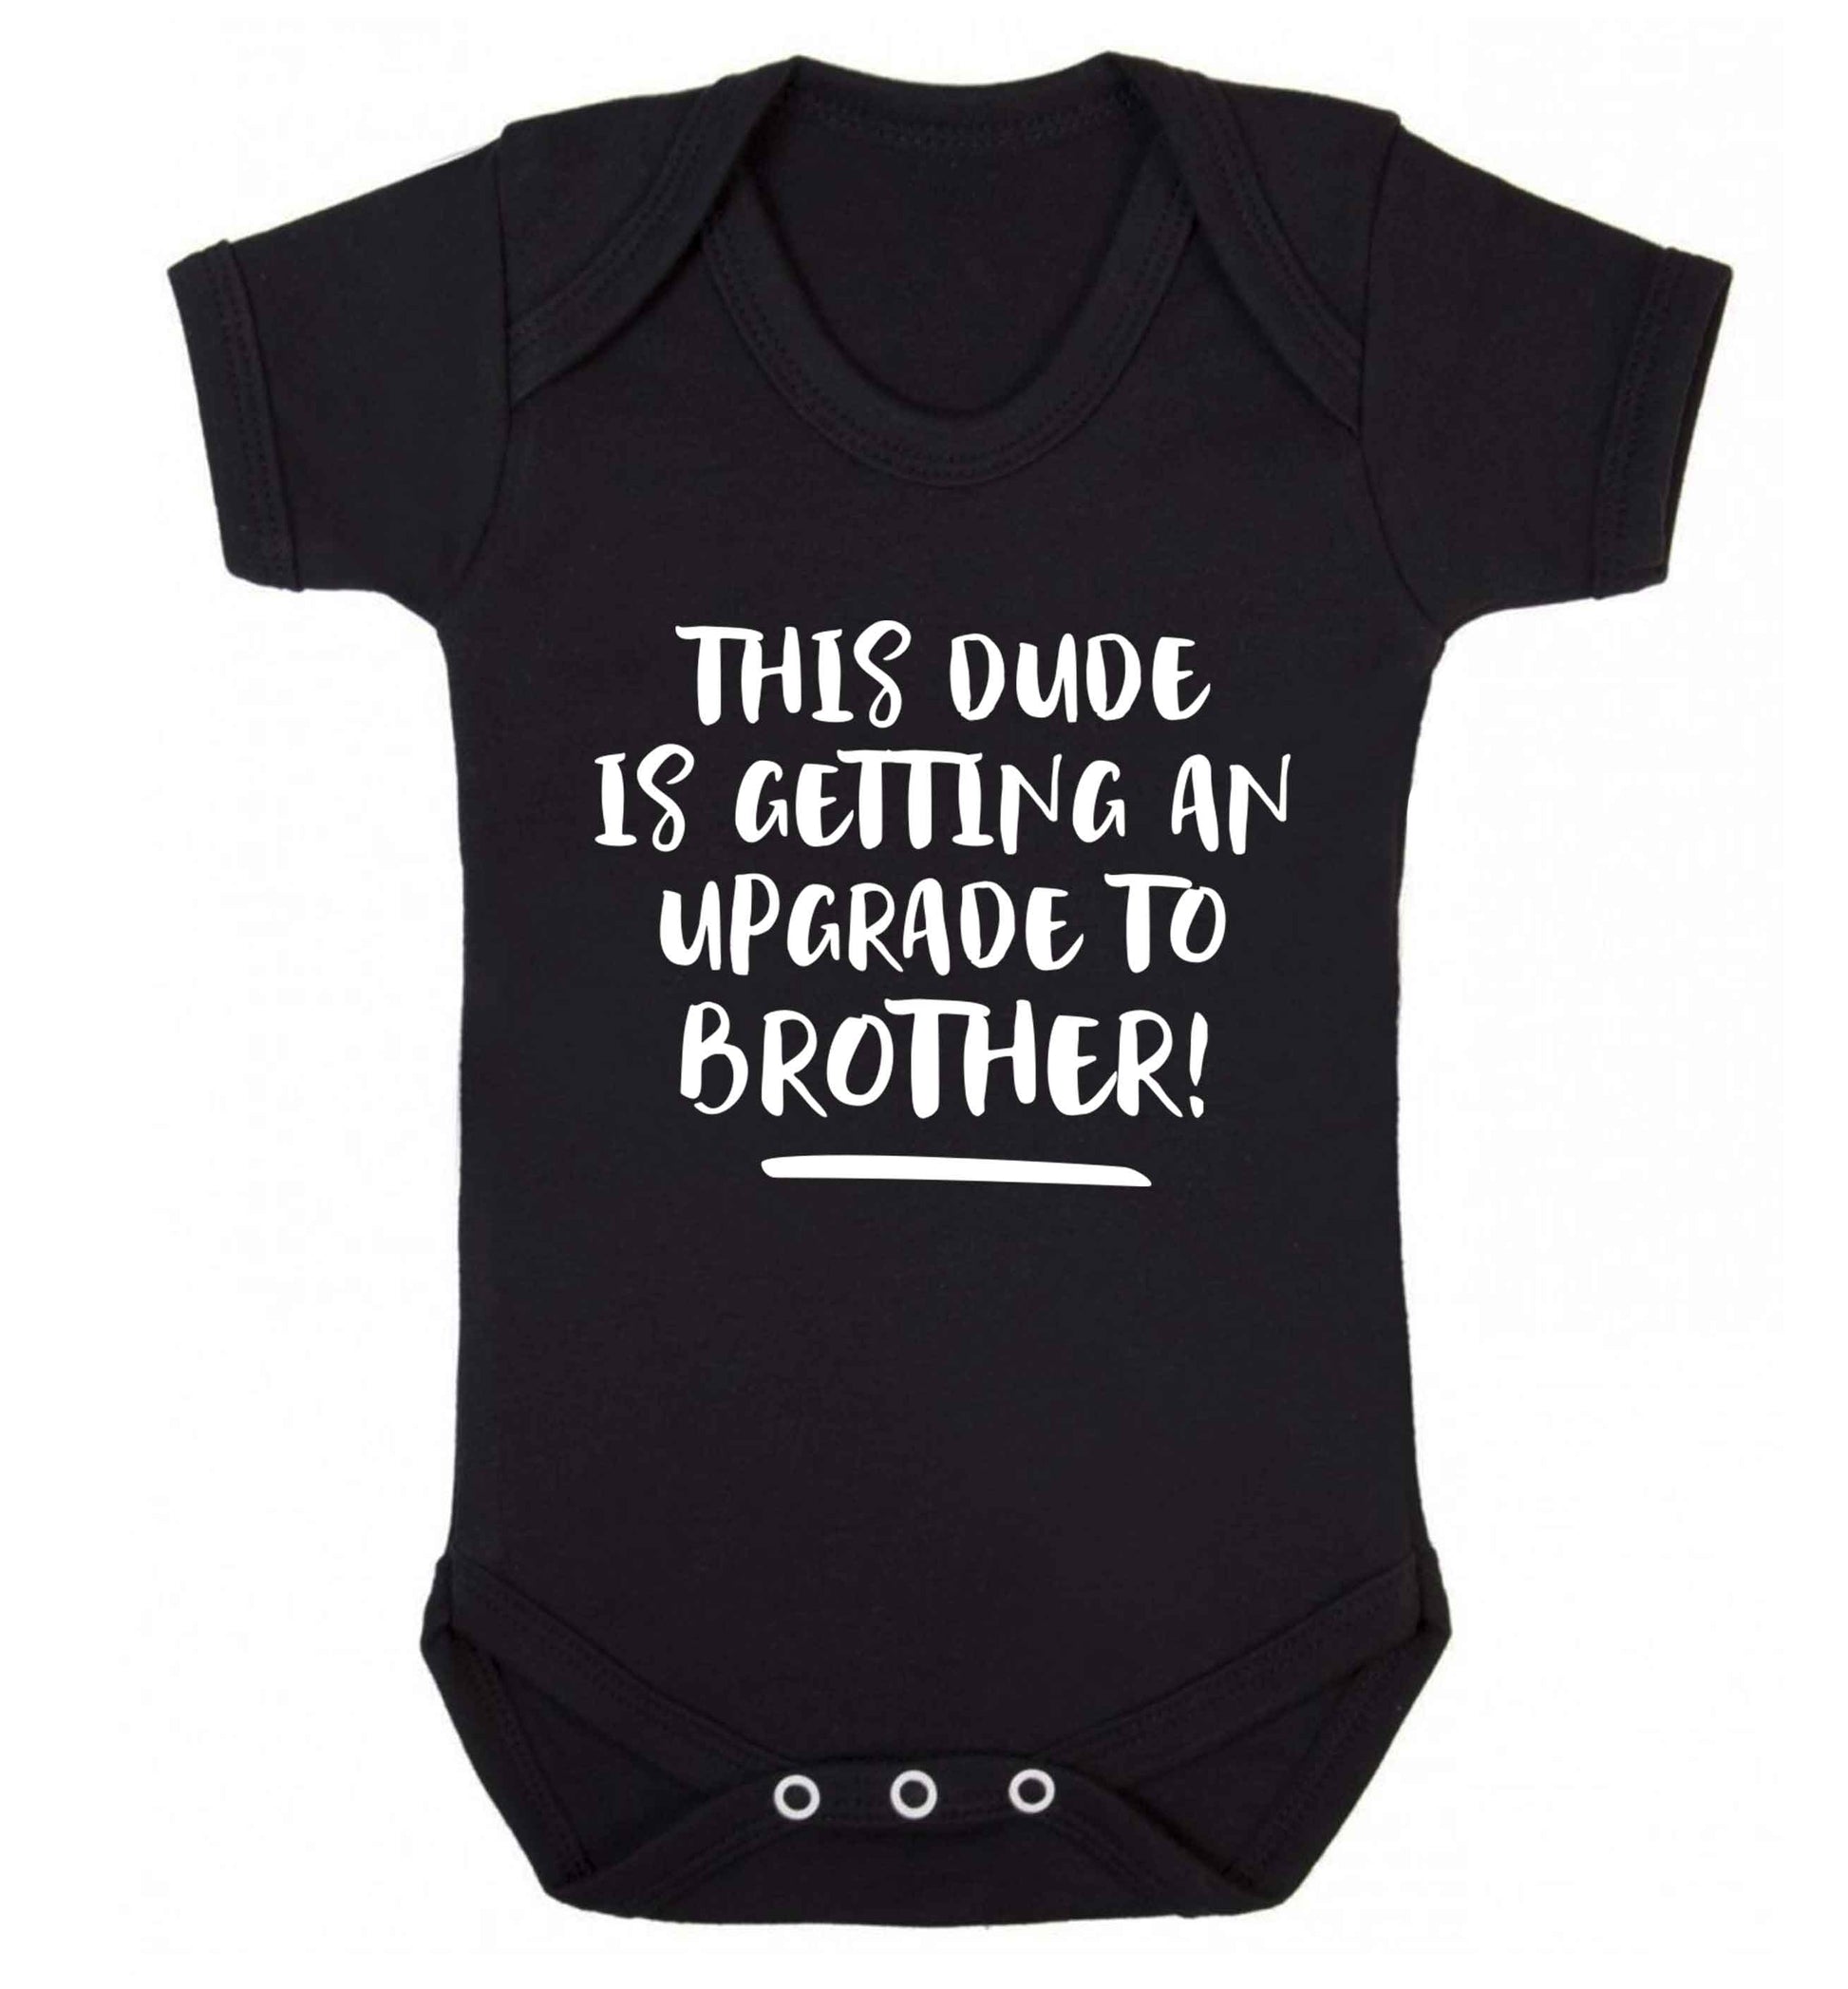 This dude is getting an upgrade to brother! Baby Vest black 18-24 months